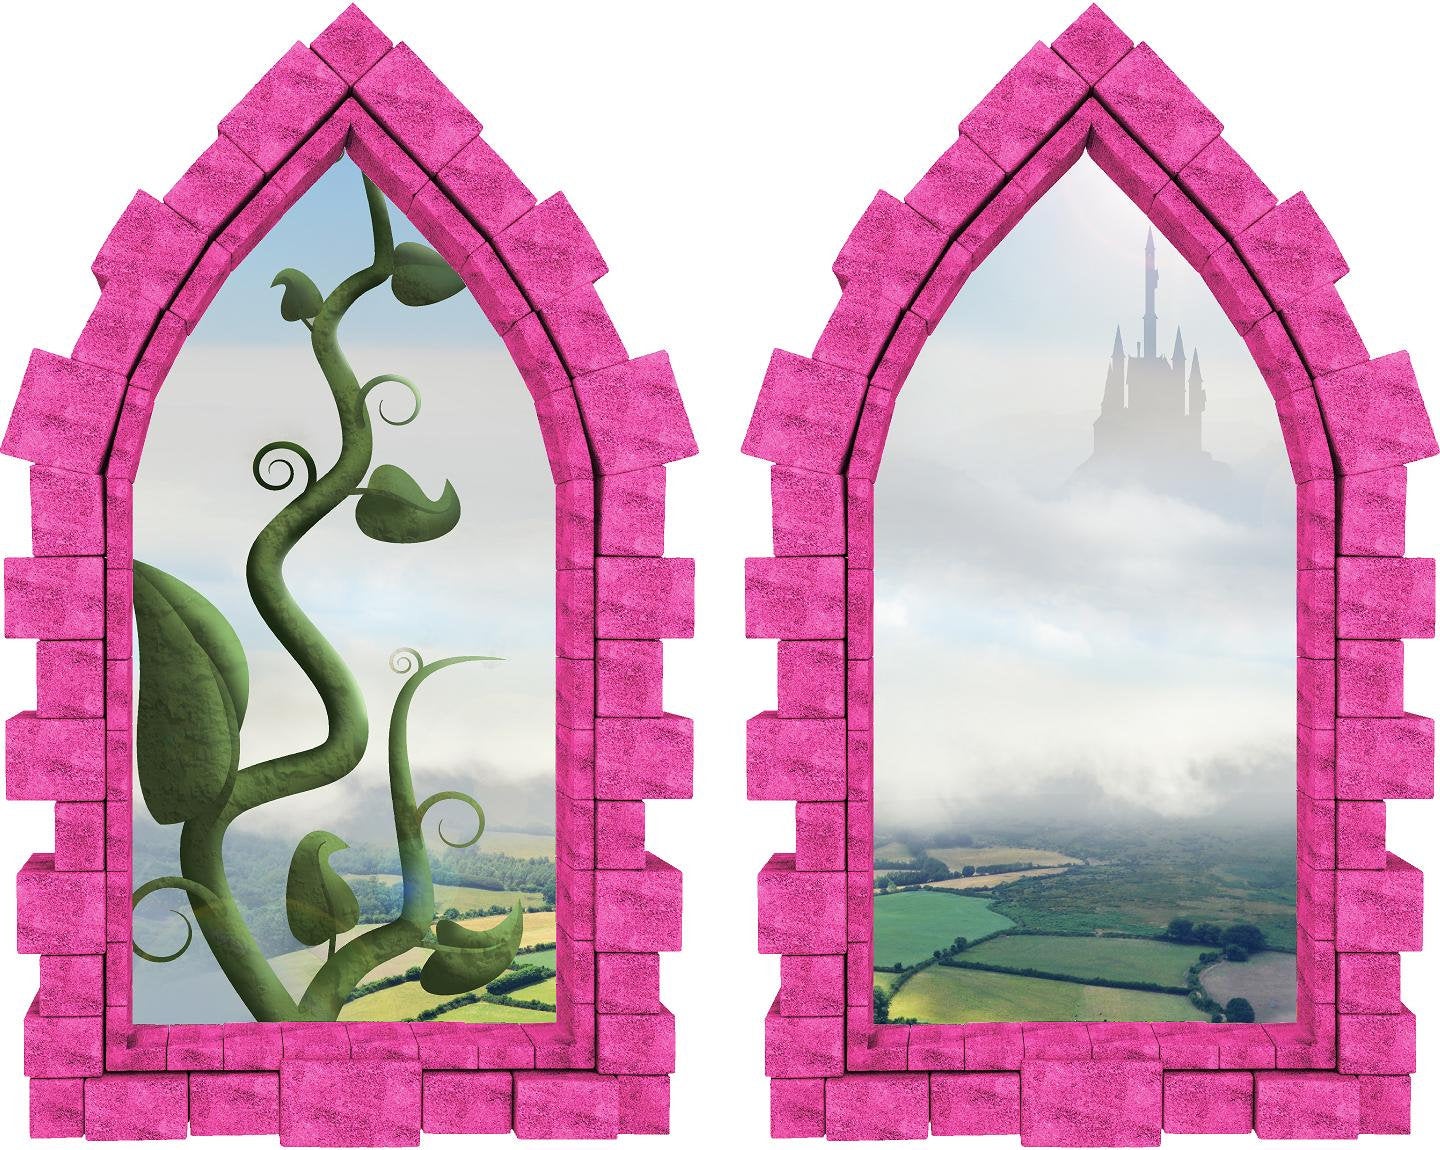 3D Castle Window Jack and the Giant Beanstalk Wall Decal Set of 2 Removable Fabric Vinyl Fantasy Wall Sticker